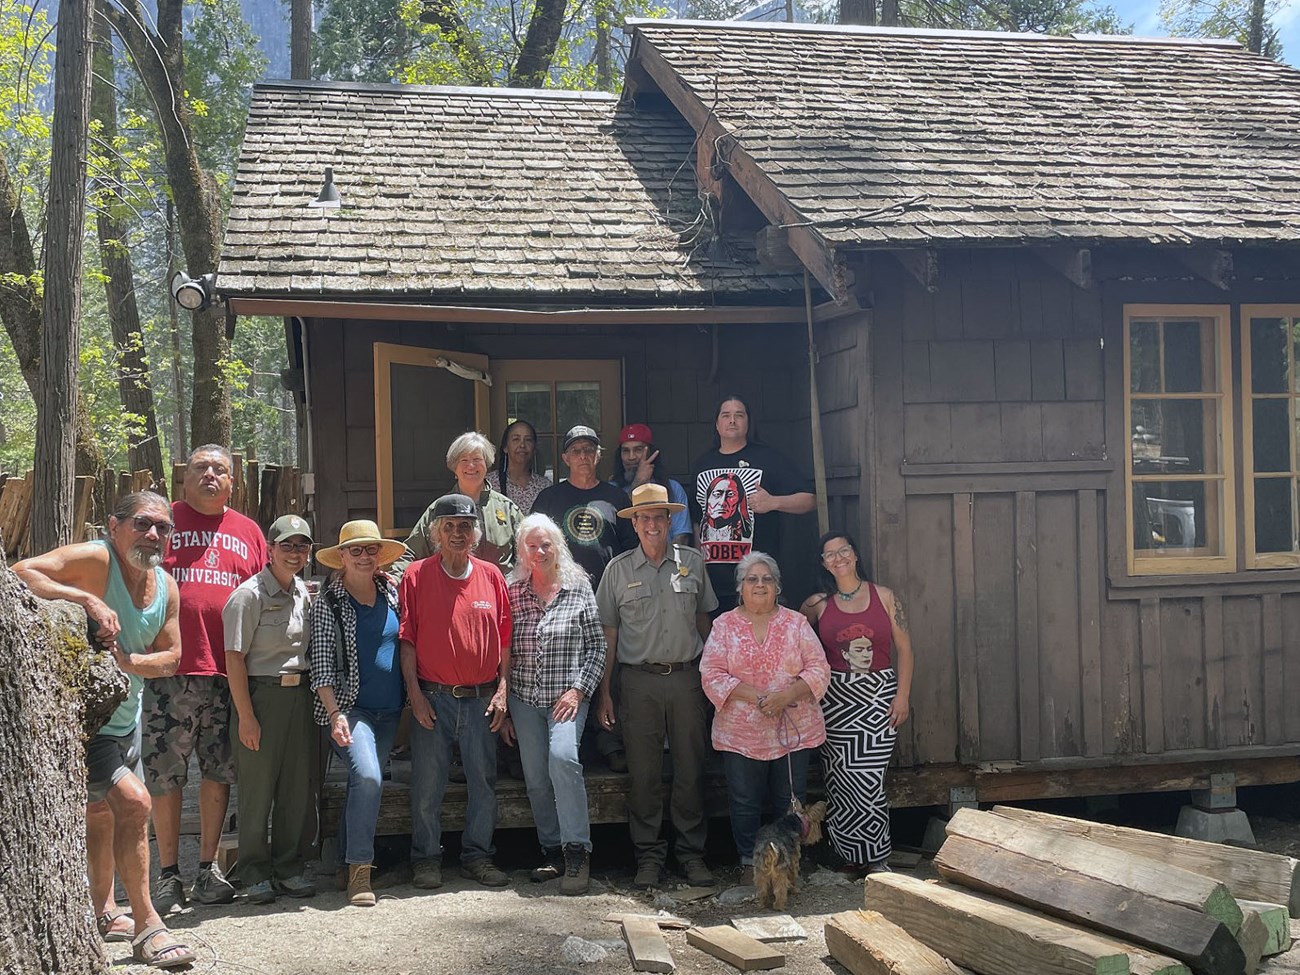 Group of indigenous people and national park service employees pose in front of wooden cabin